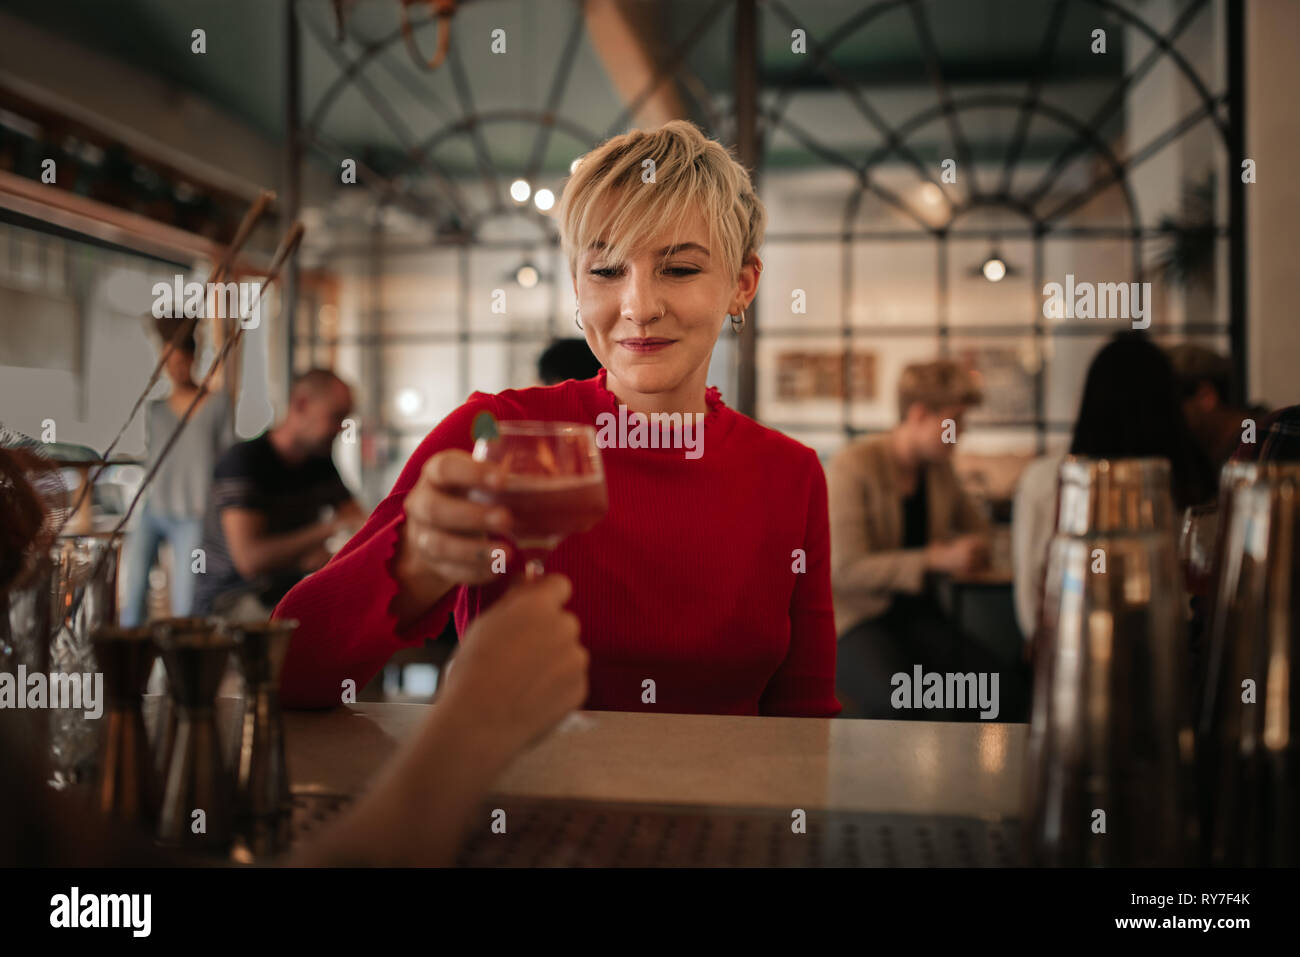 Smiling young woman getting drinks in a bar at night Stock Photo